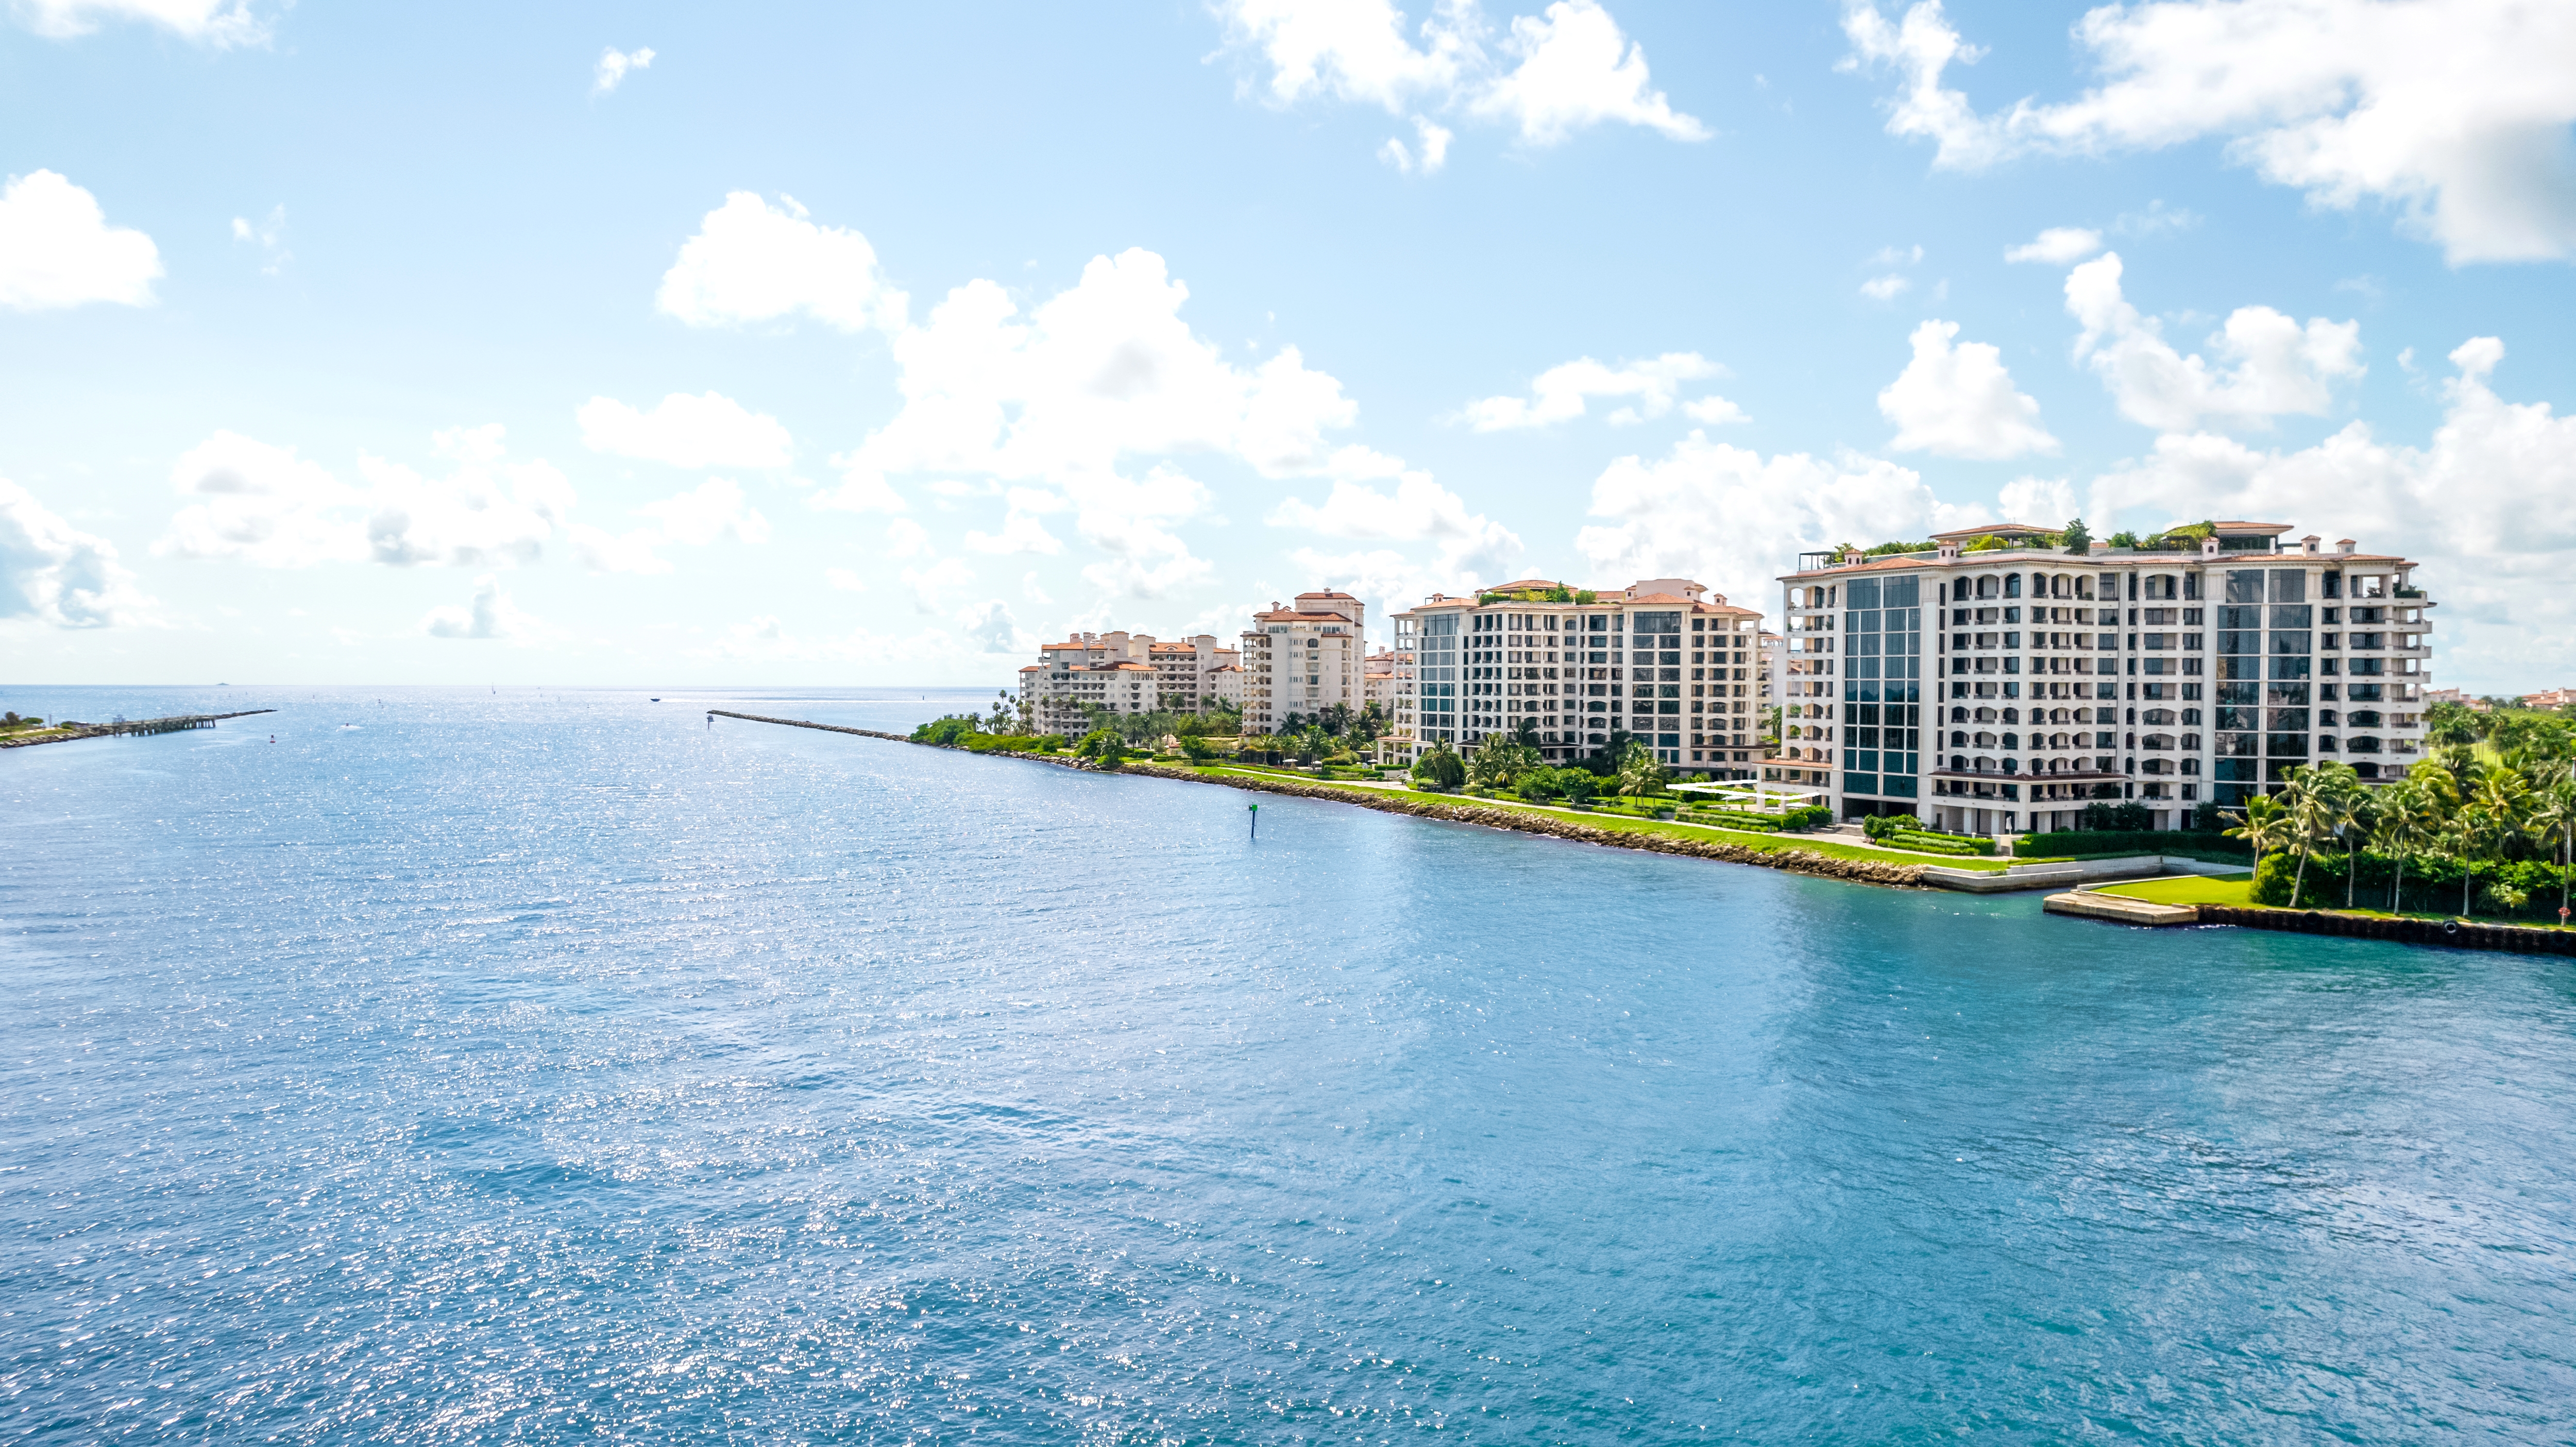 A Record-Breaking Sale, the highest price-per-square-foot in the history of Fisher Island